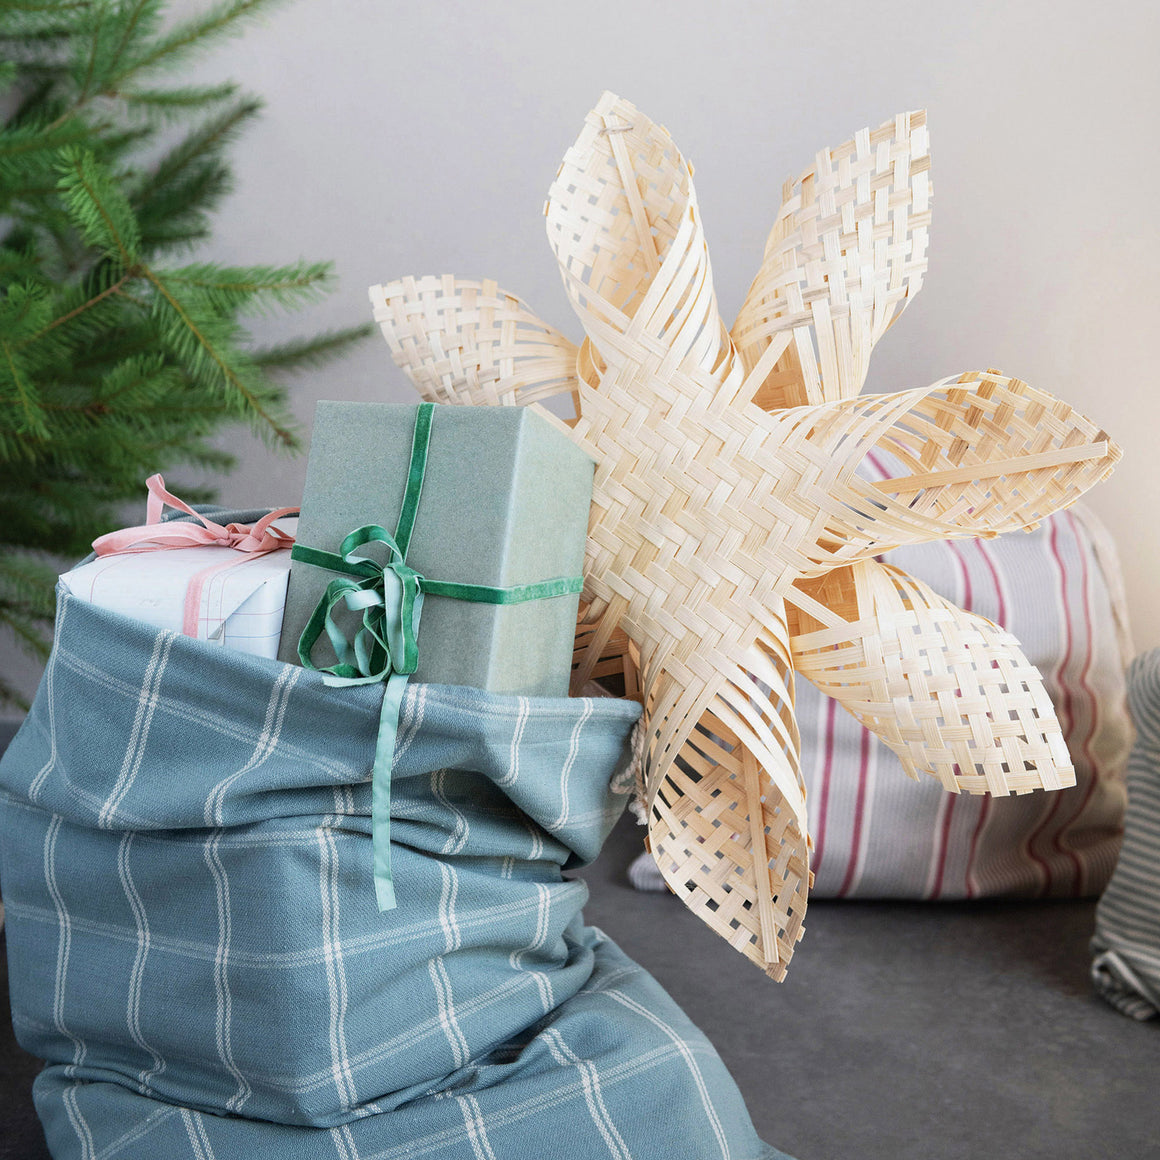 Cotton Gift/Laundry Bag